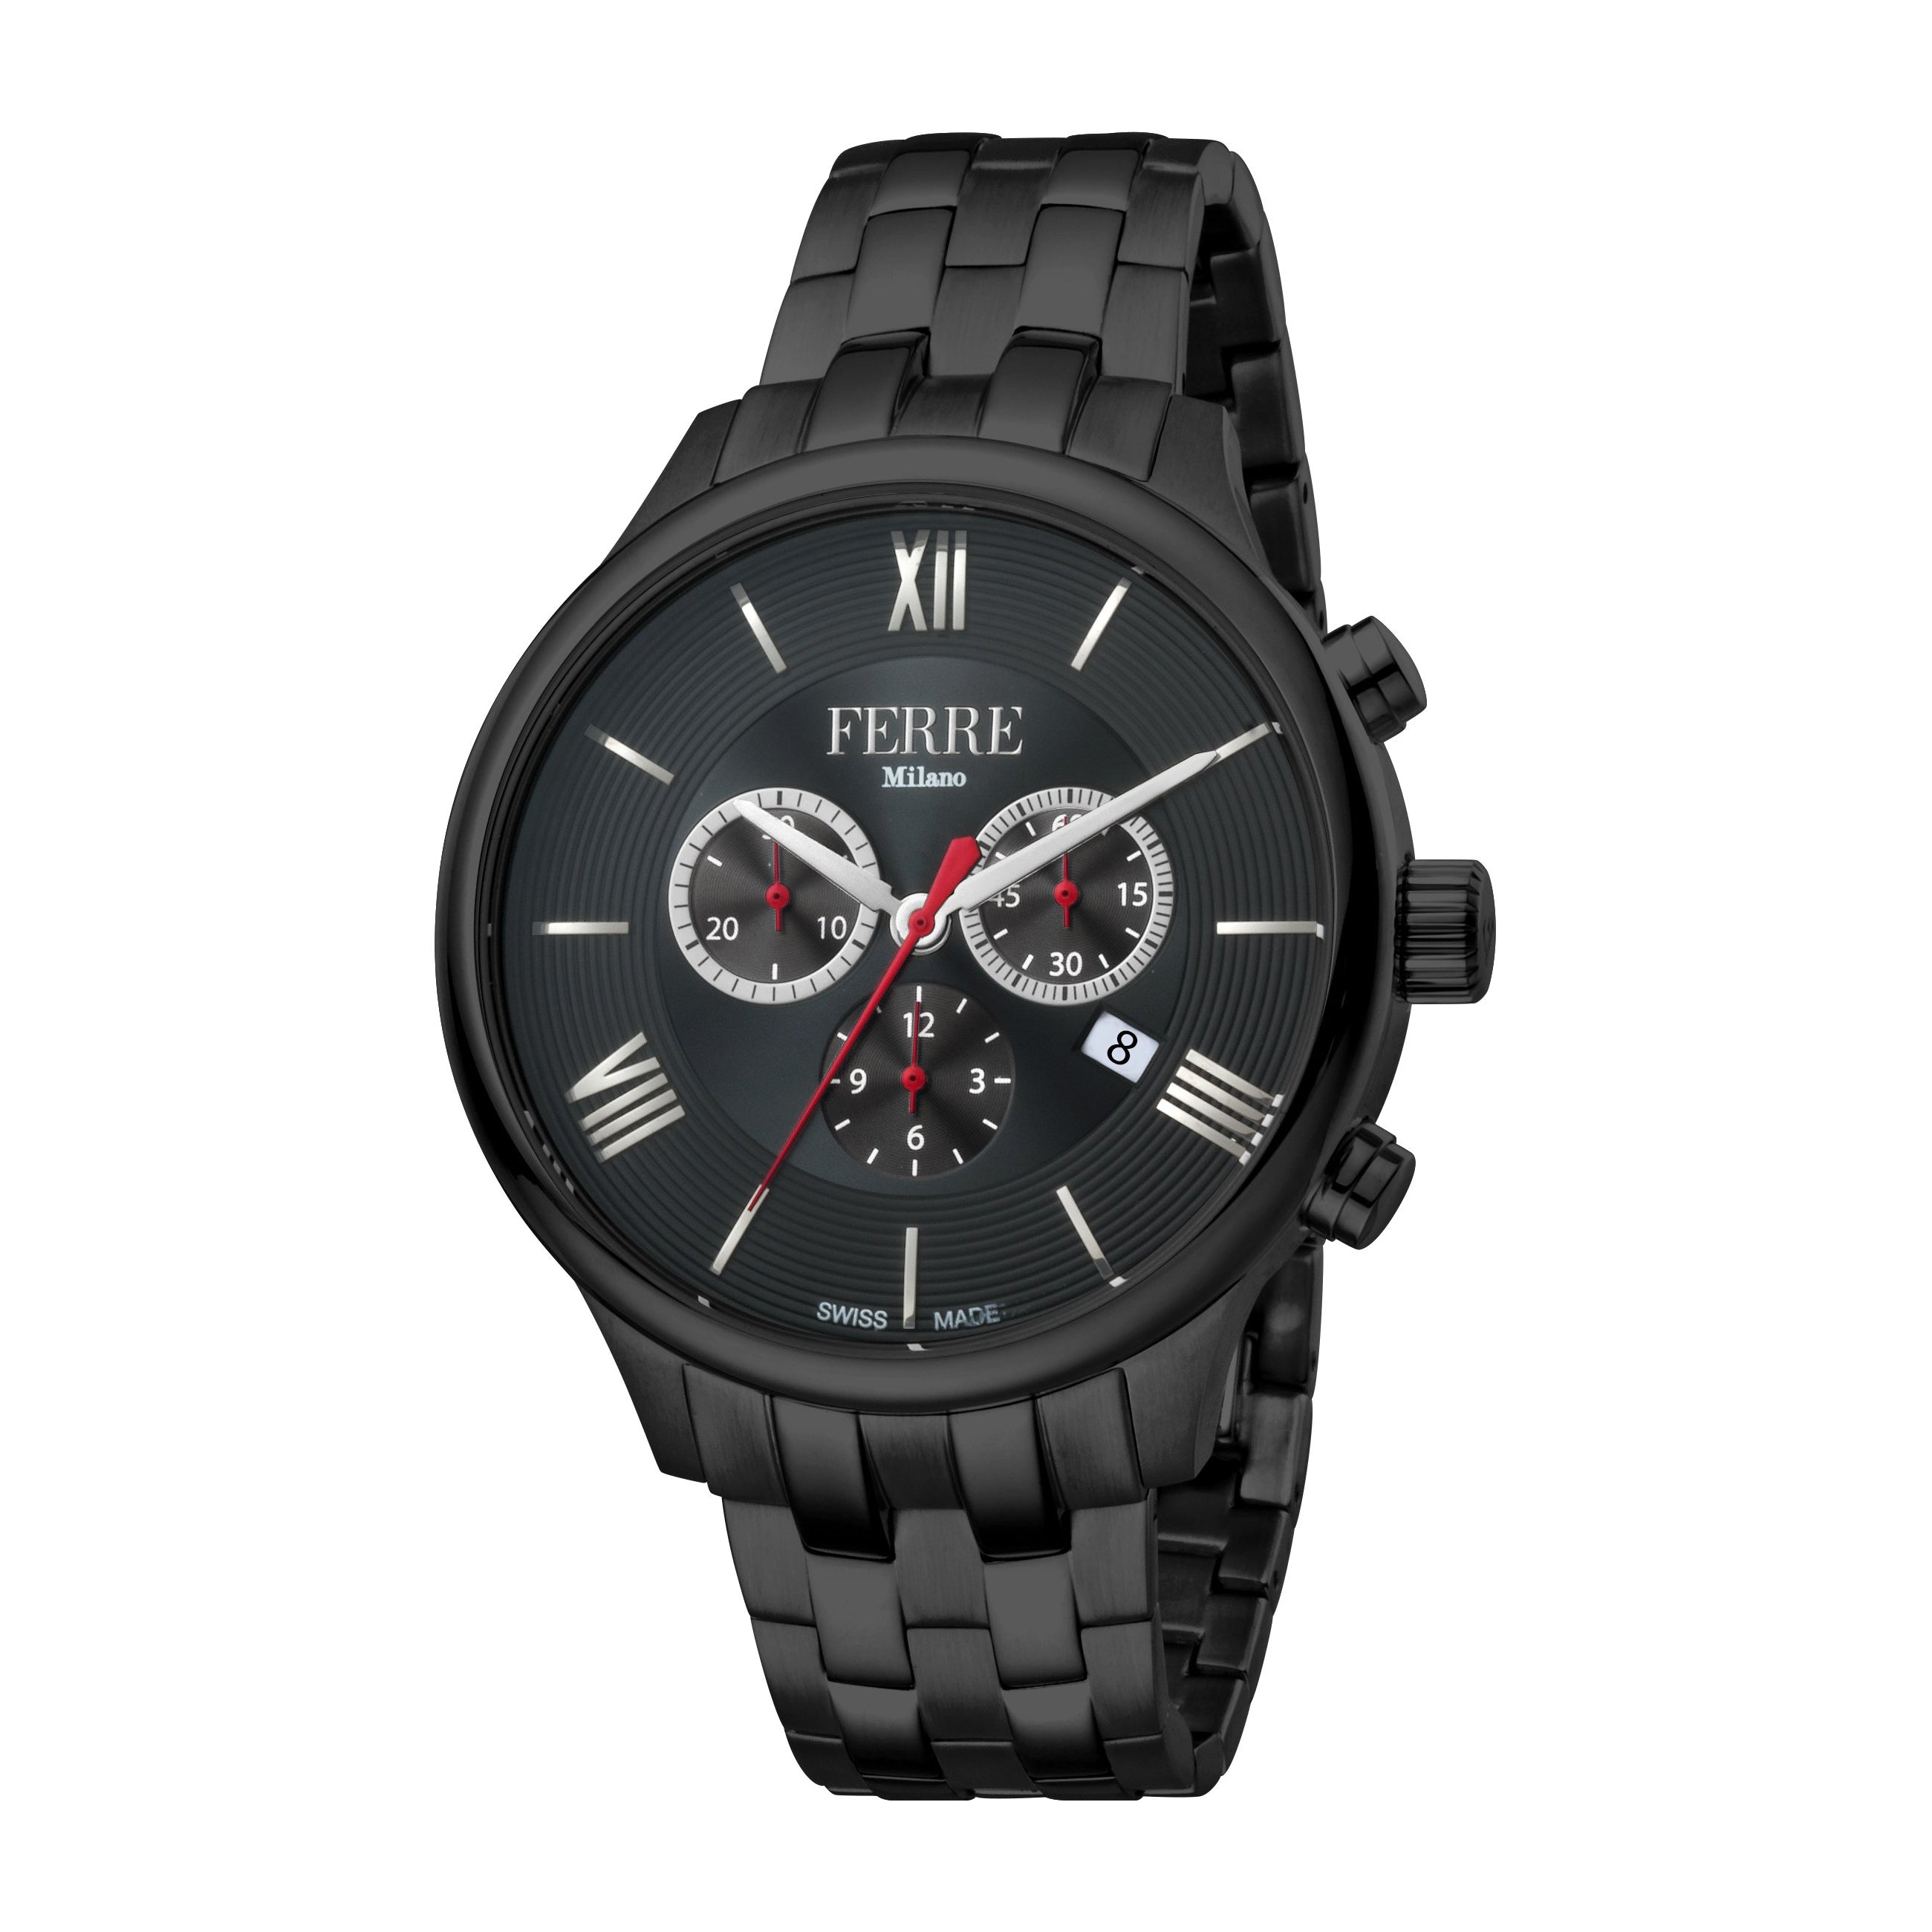 Buy D1 Milano Black Dial Watches For Men - A-utb01 Online